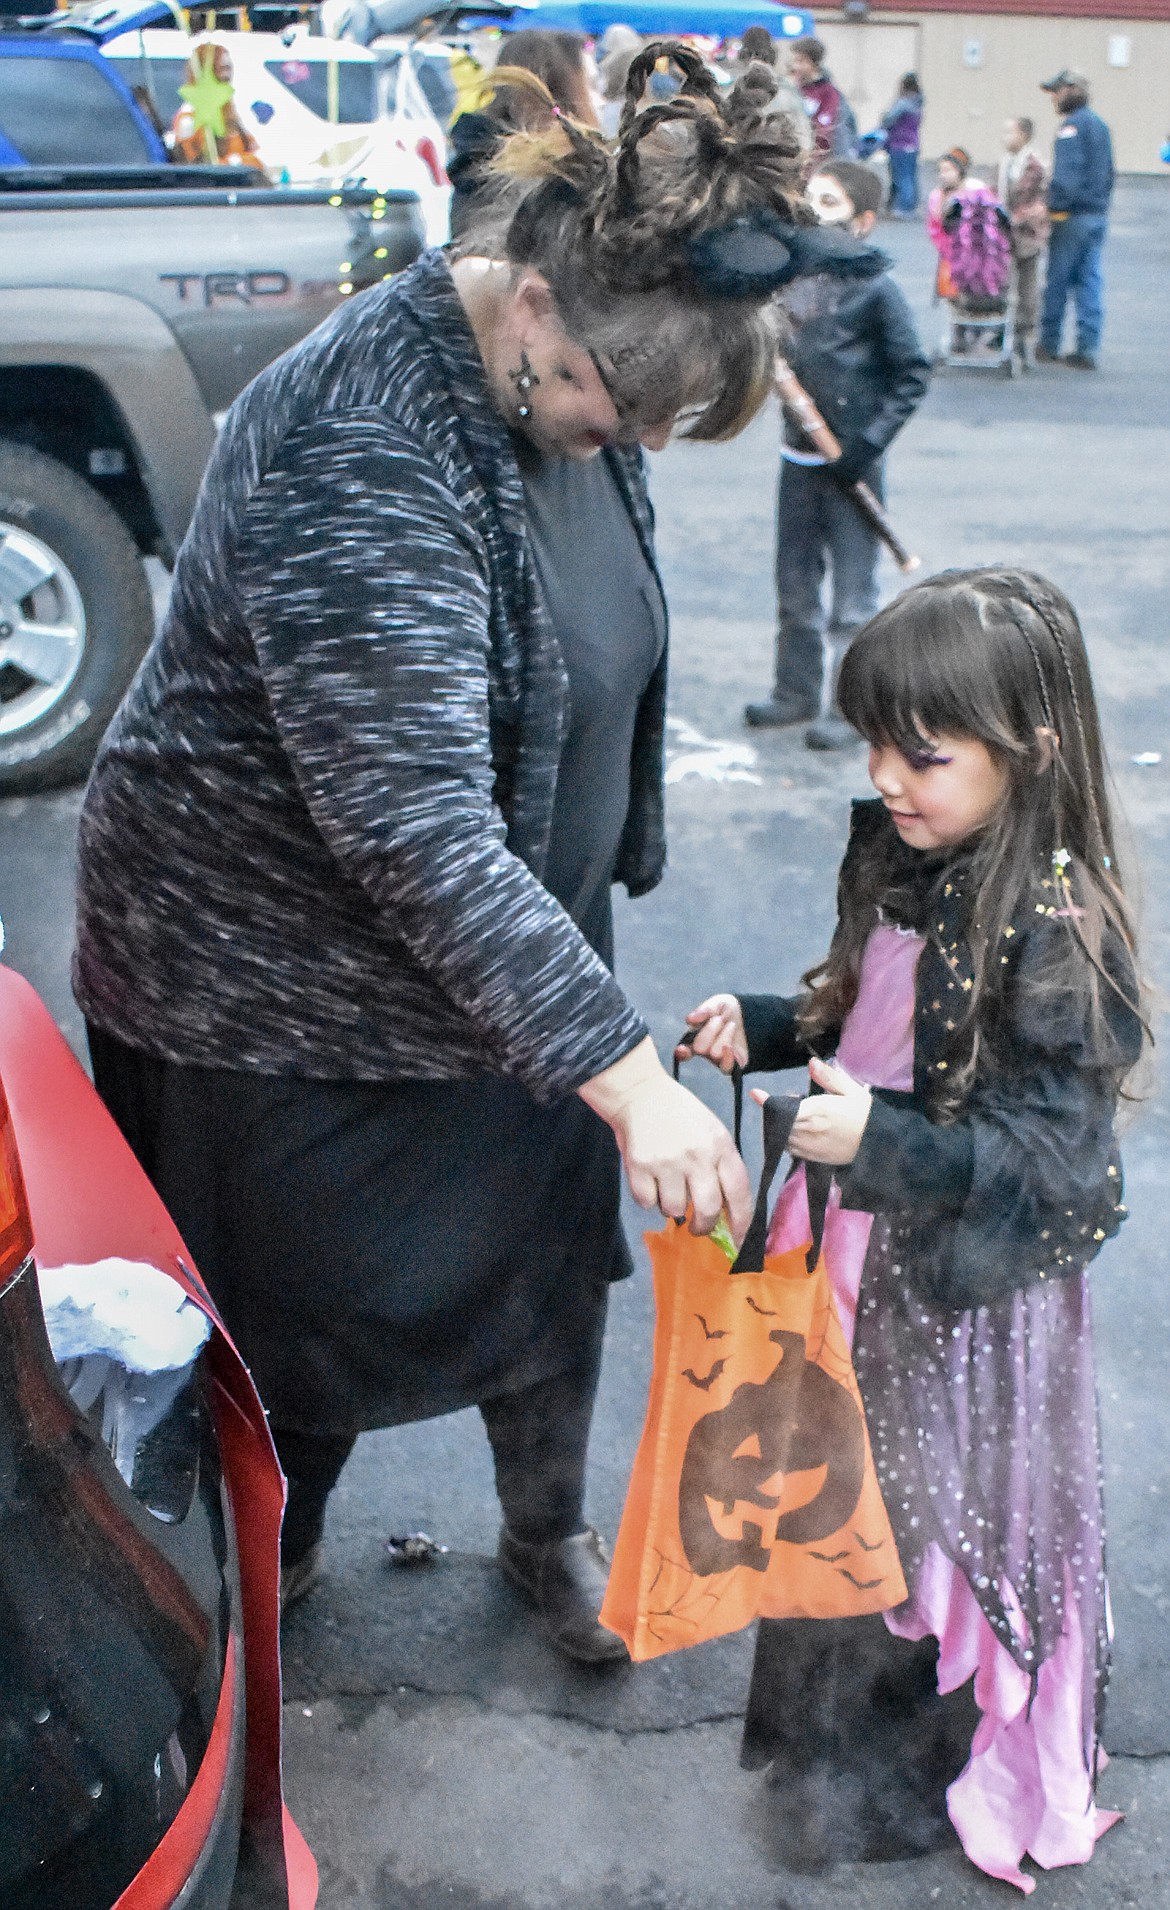 Troy City Clerk/Treasurer Tracy Rebo takes a break from dancing to stay warm to give Avery Wallace candy at Trunk-or-Treat at the Troy Activity Center Wednesday. (Ben Kibbey/The Western News)